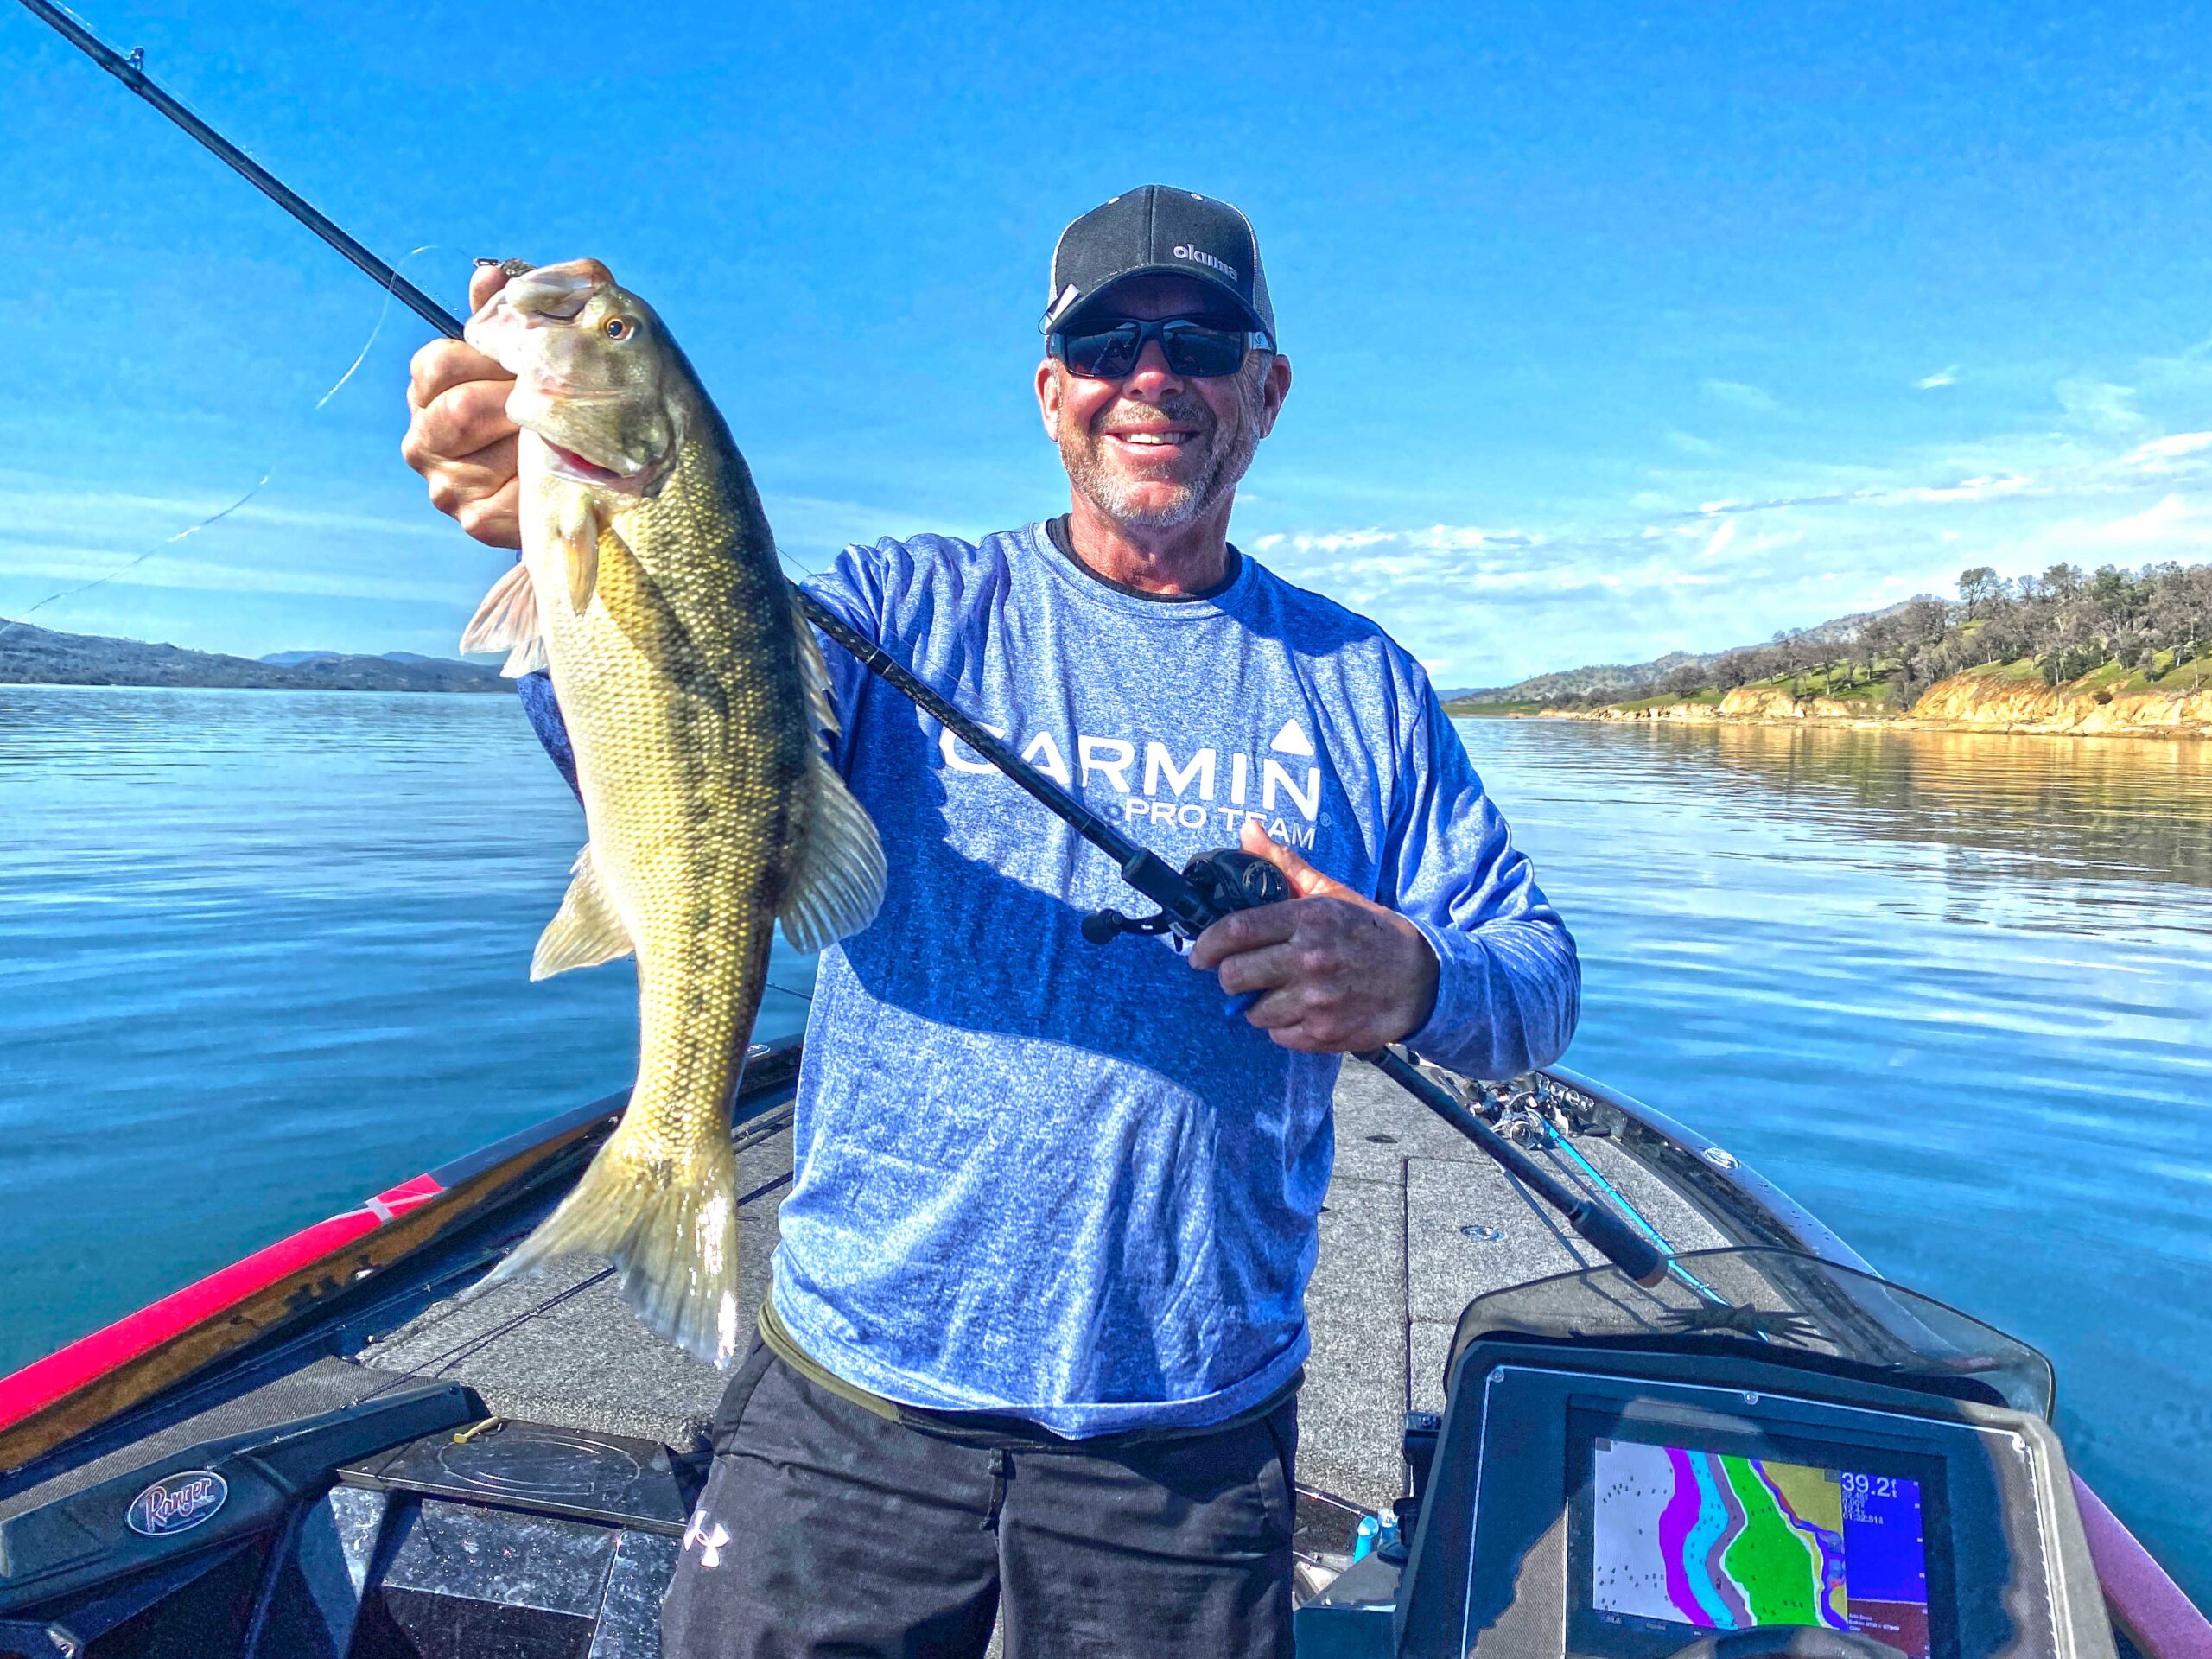 Catching Spotted Bass This Summer at Lake Oroville